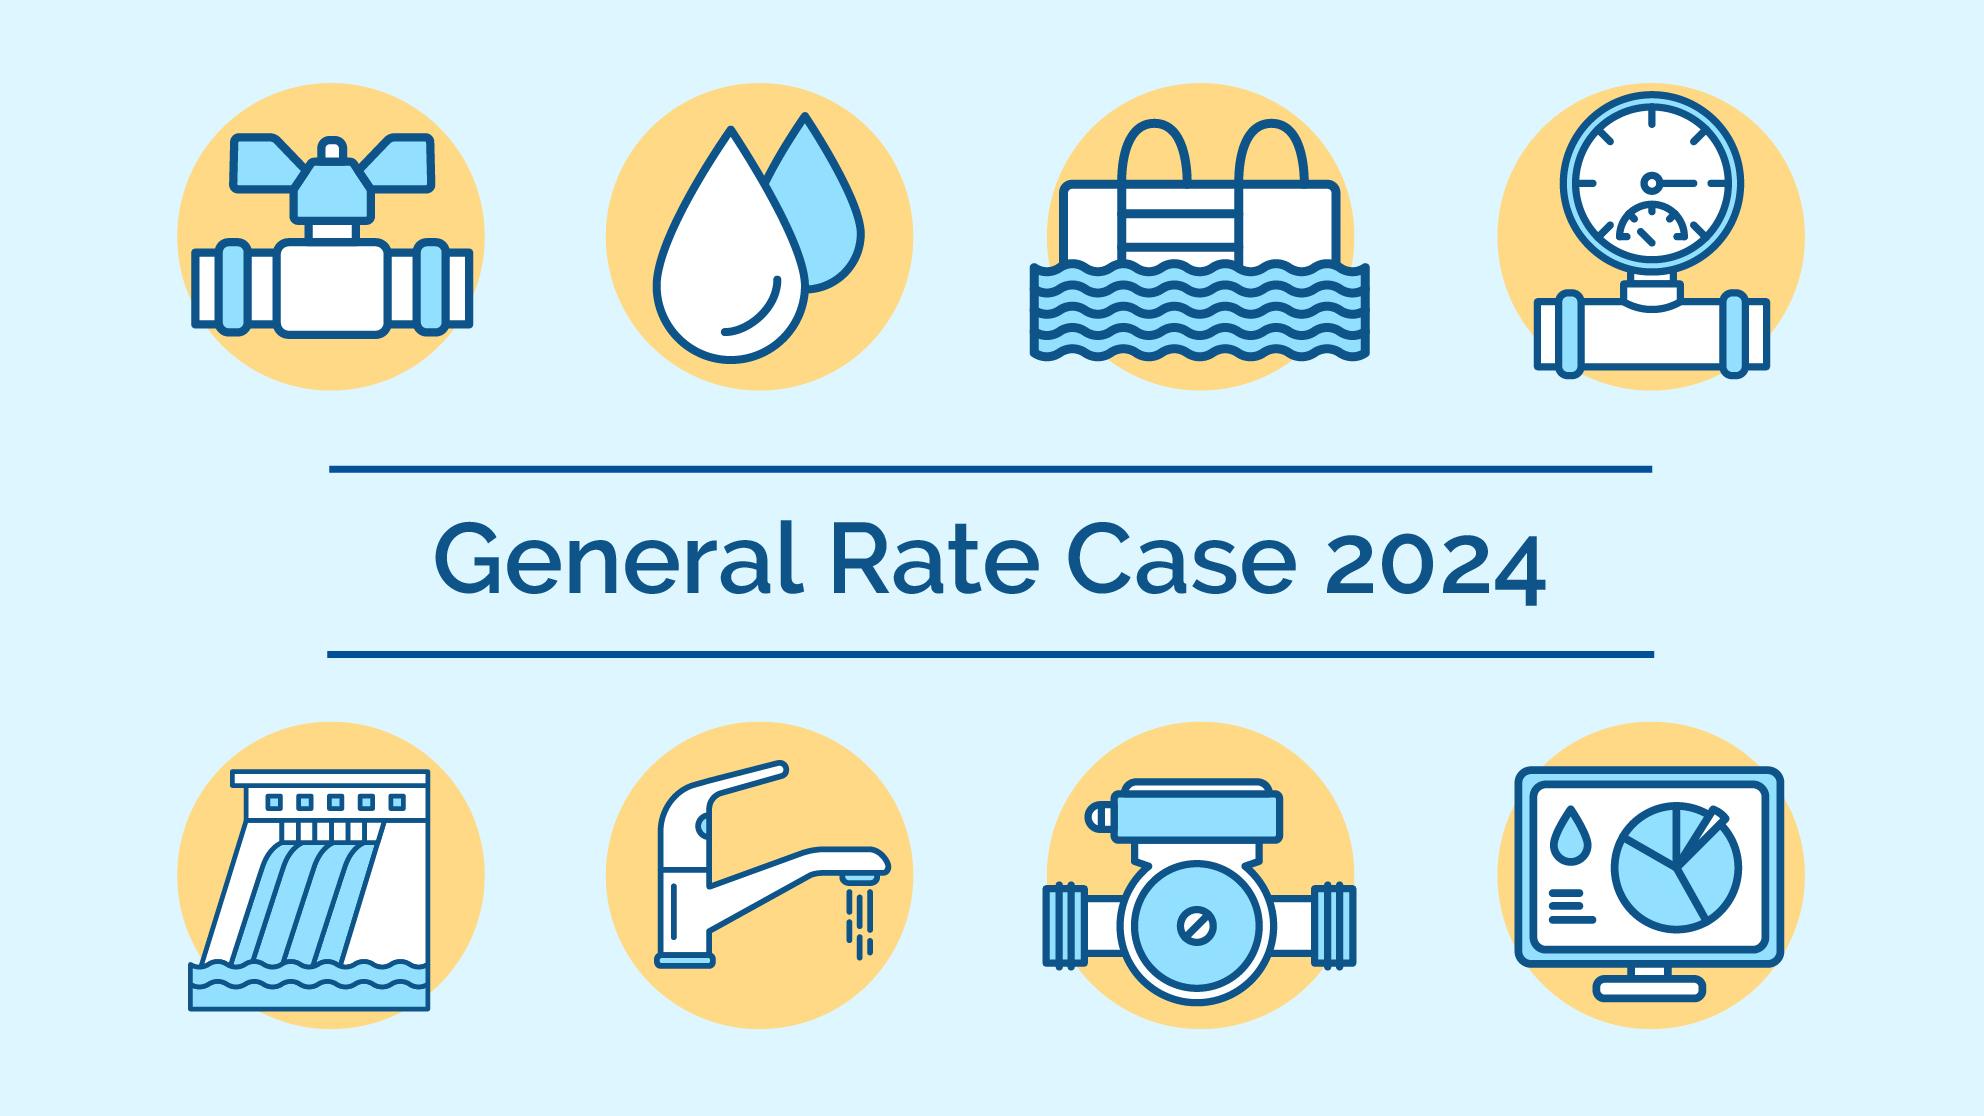 General Rate Case 2024 graphic